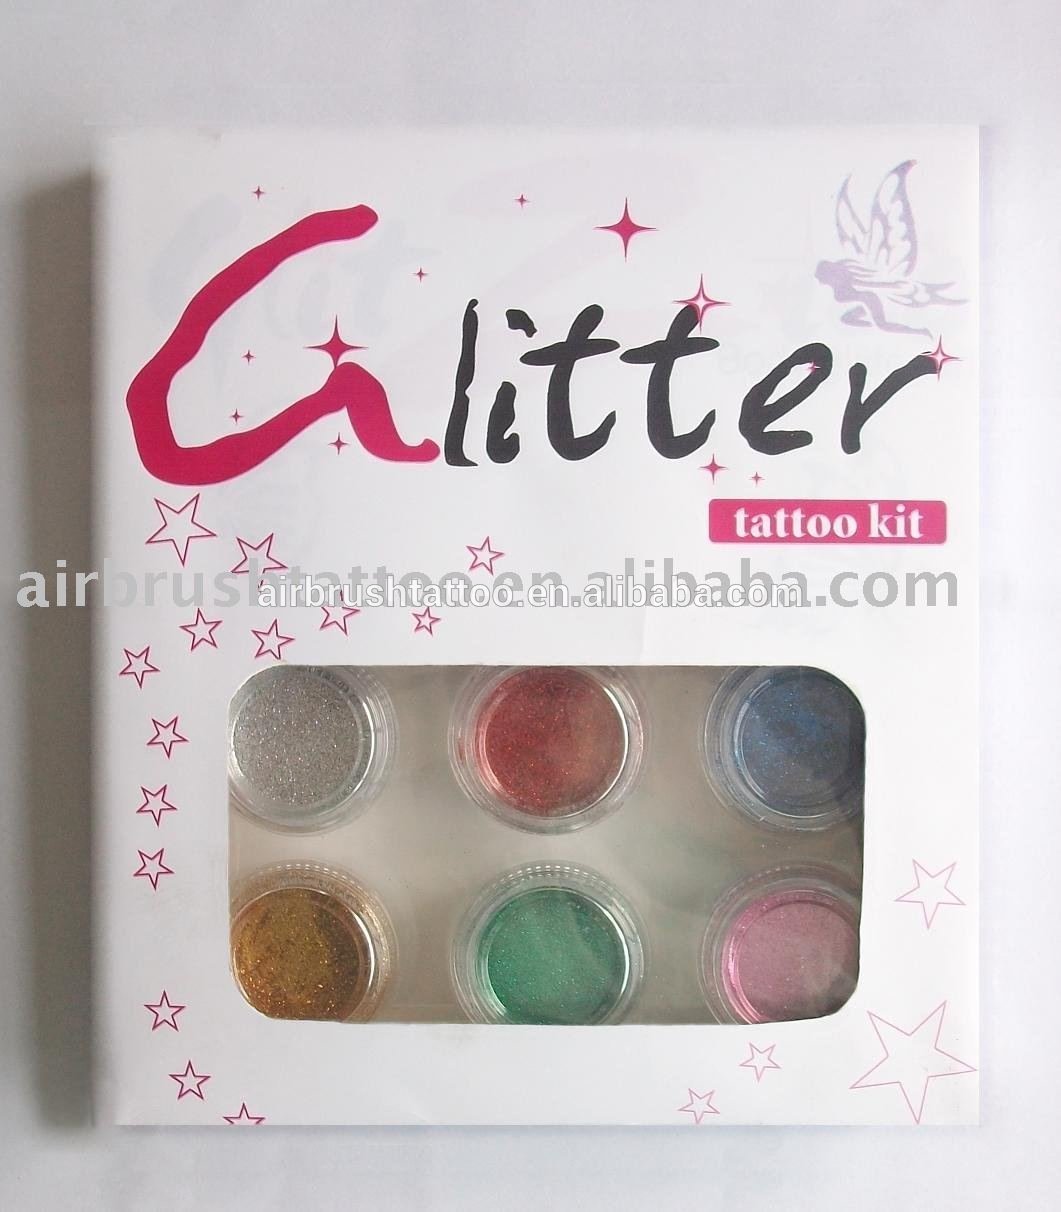 See larger image: glitter tattoo sets. Add to My Favorites. Add to My Favorites. Add Product to Favorites; Add Company to Favorites